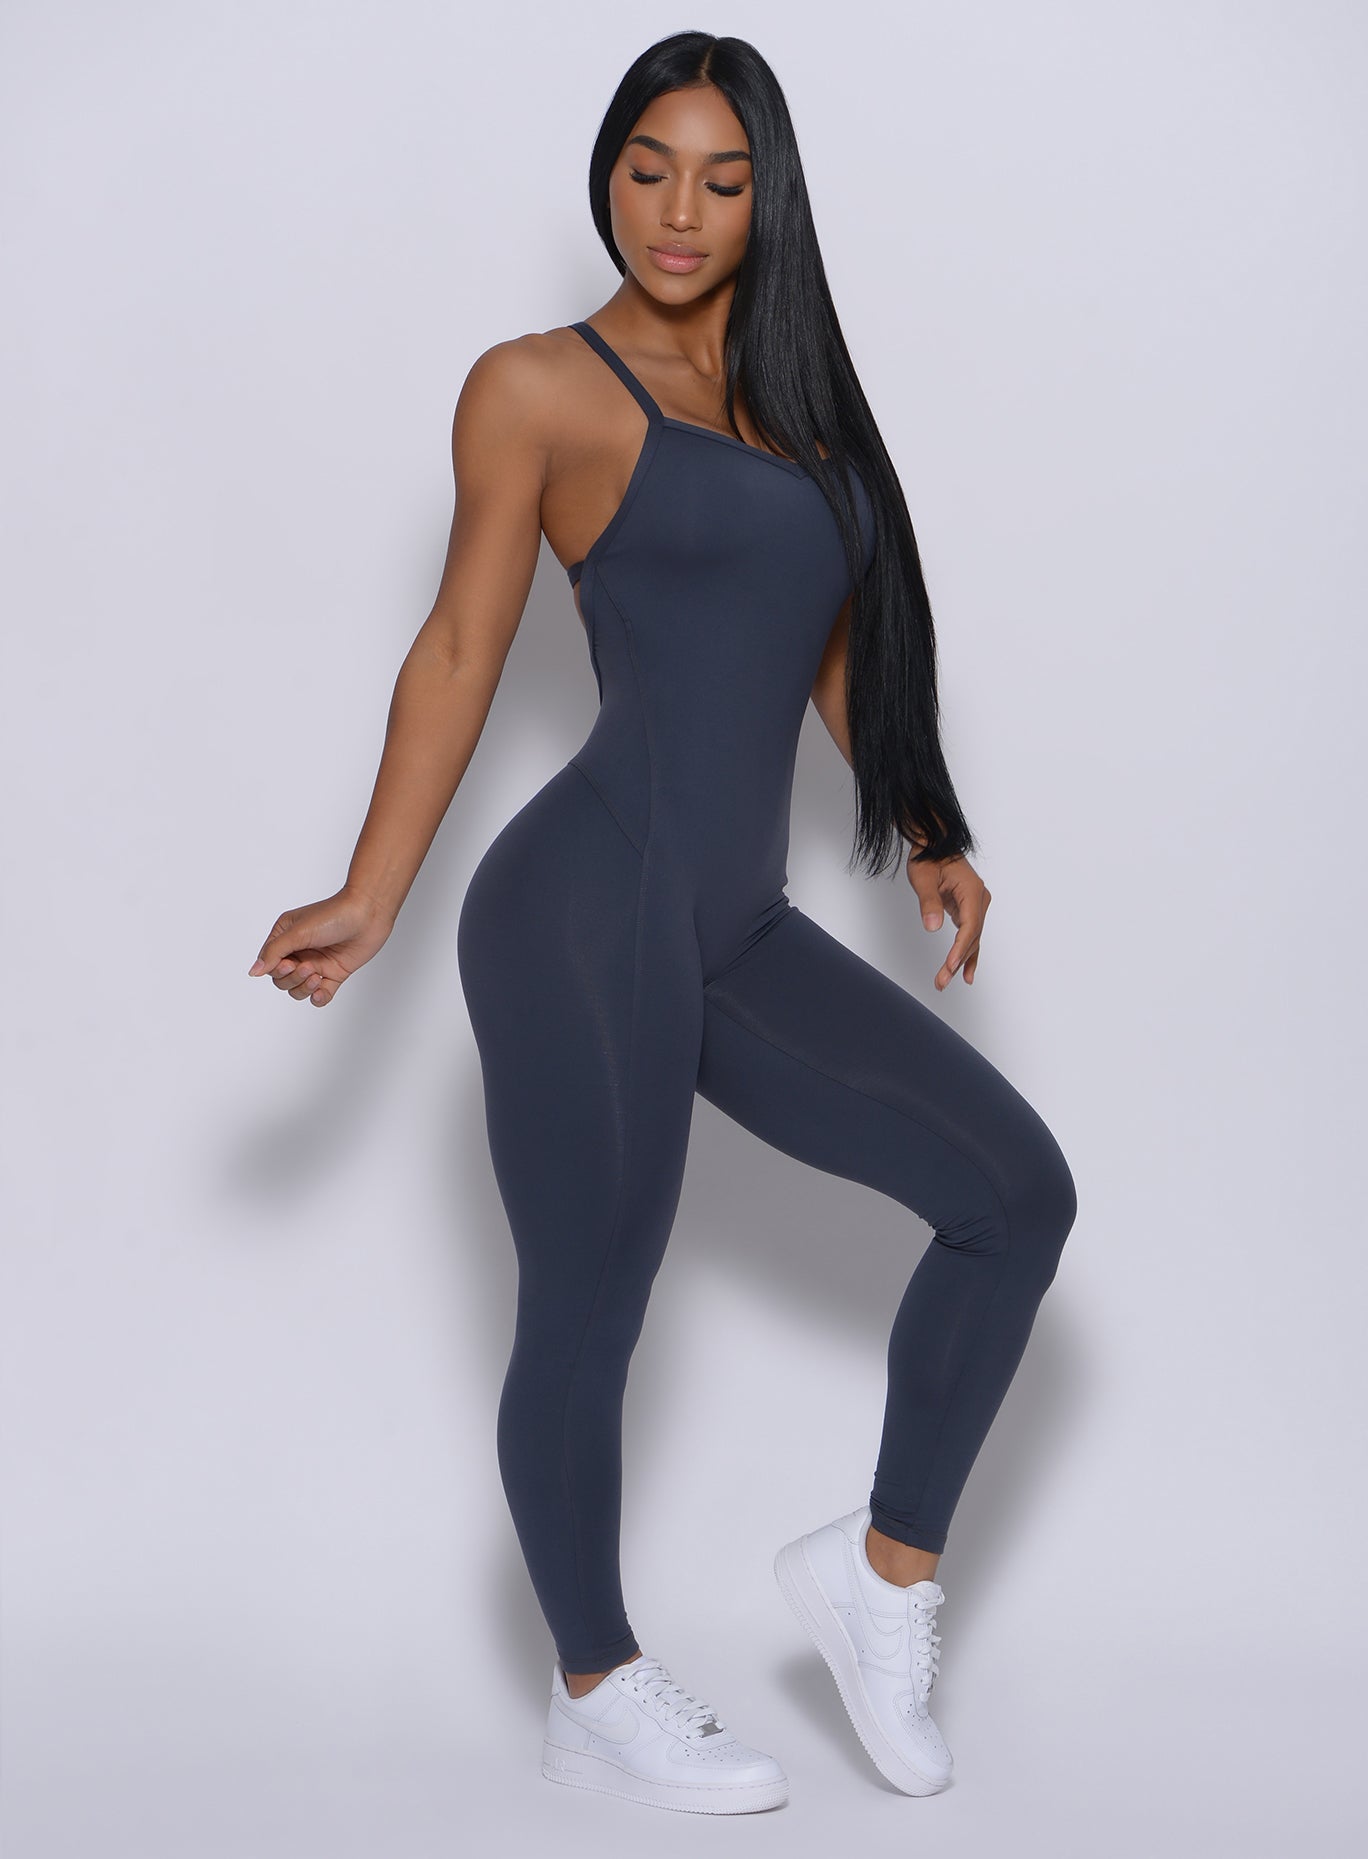 Right side  profile view of a model in our sculpted bodysuit in summit gray color